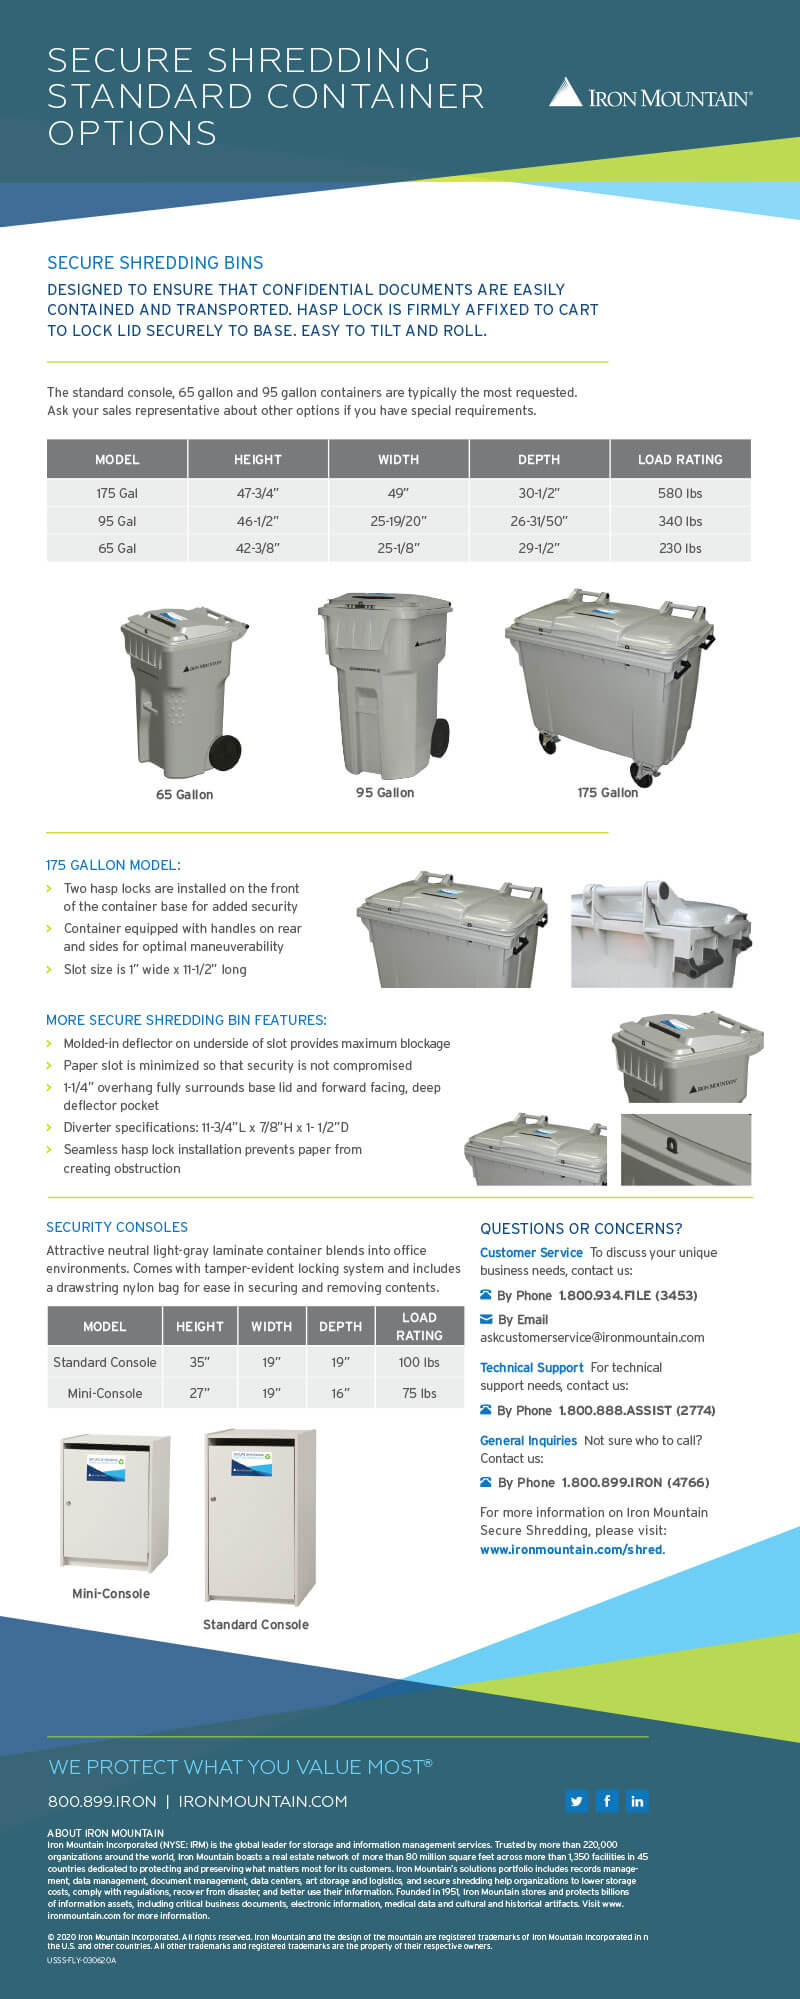 Secure shredding standard container options